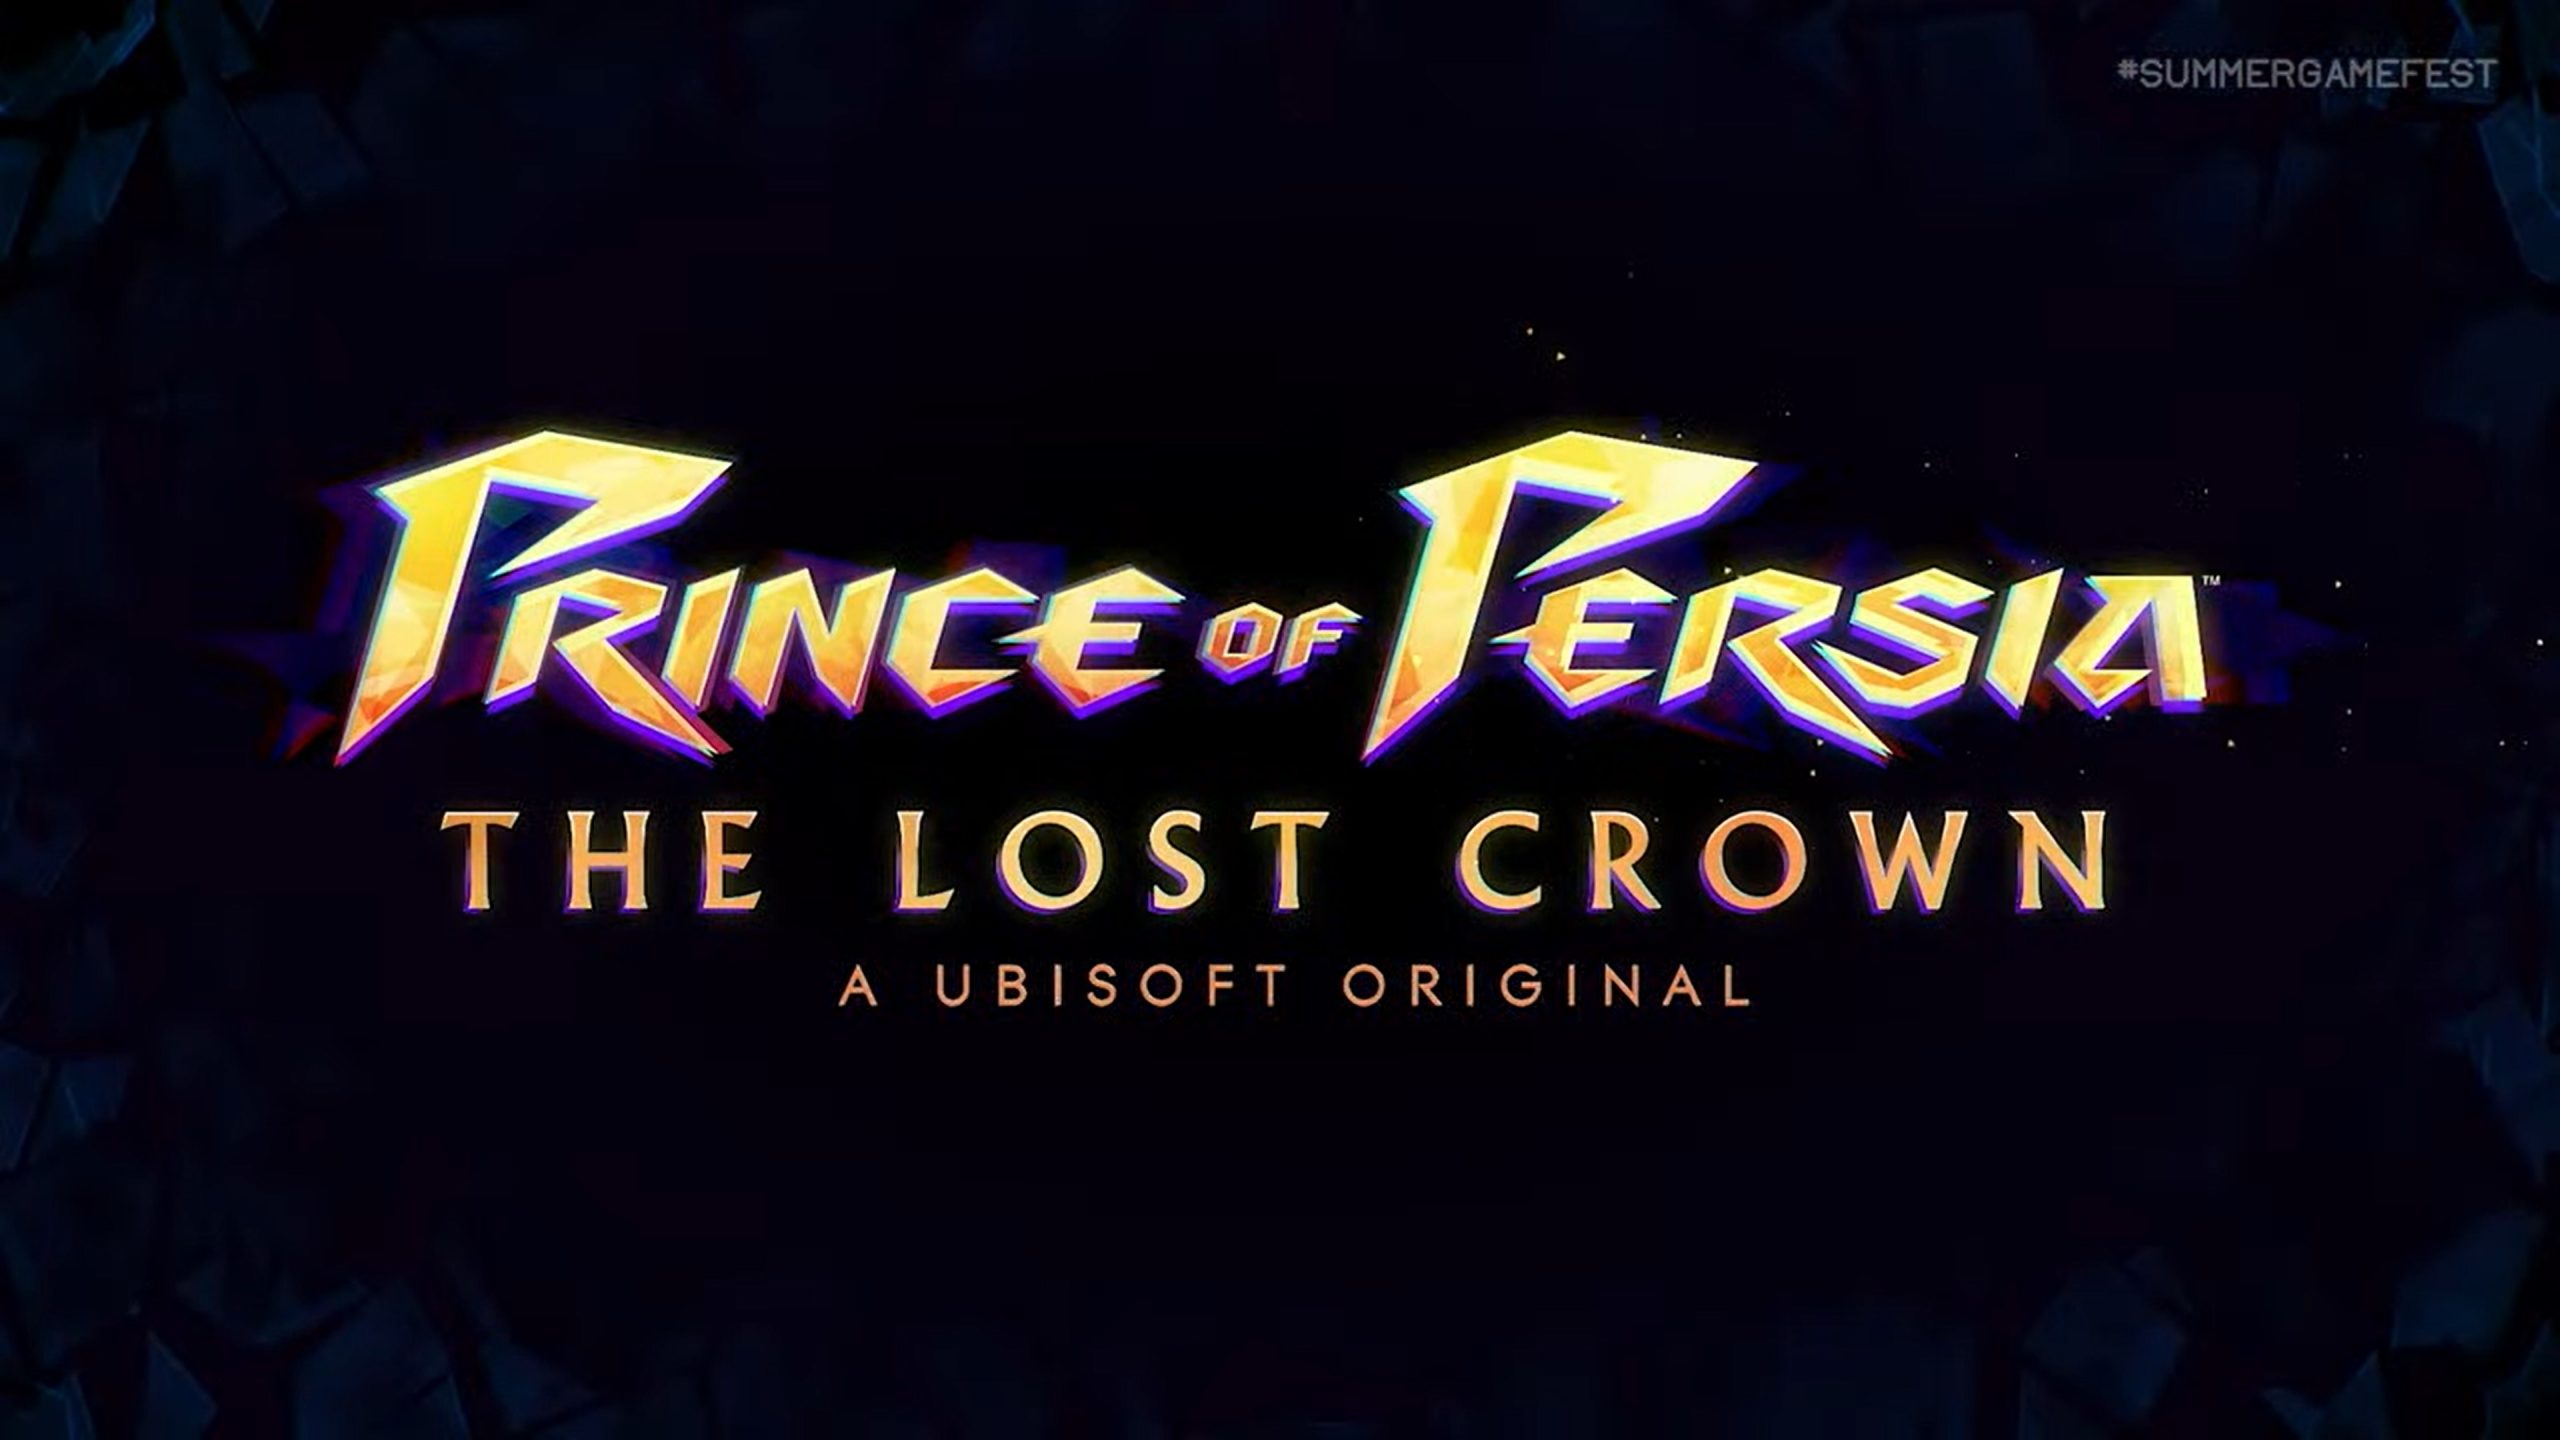 Prince of Persia: The Lost Crown announced for Switch